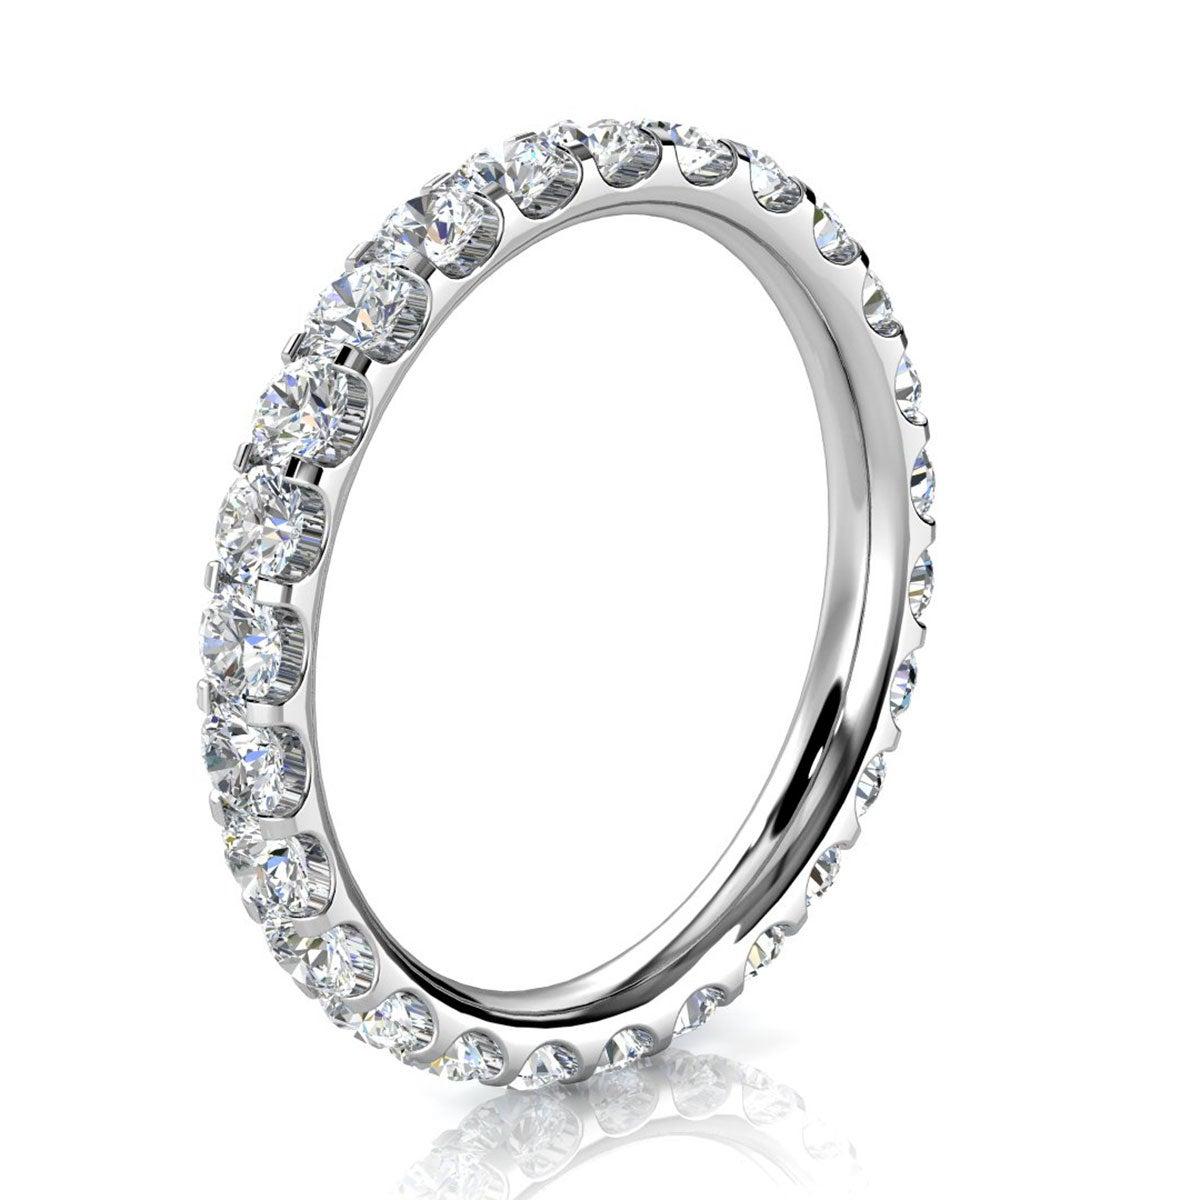 For Sale:  14k White Gold Viola Eternity Micro-Prong Diamond Ring '1 Ct. Tw' 2